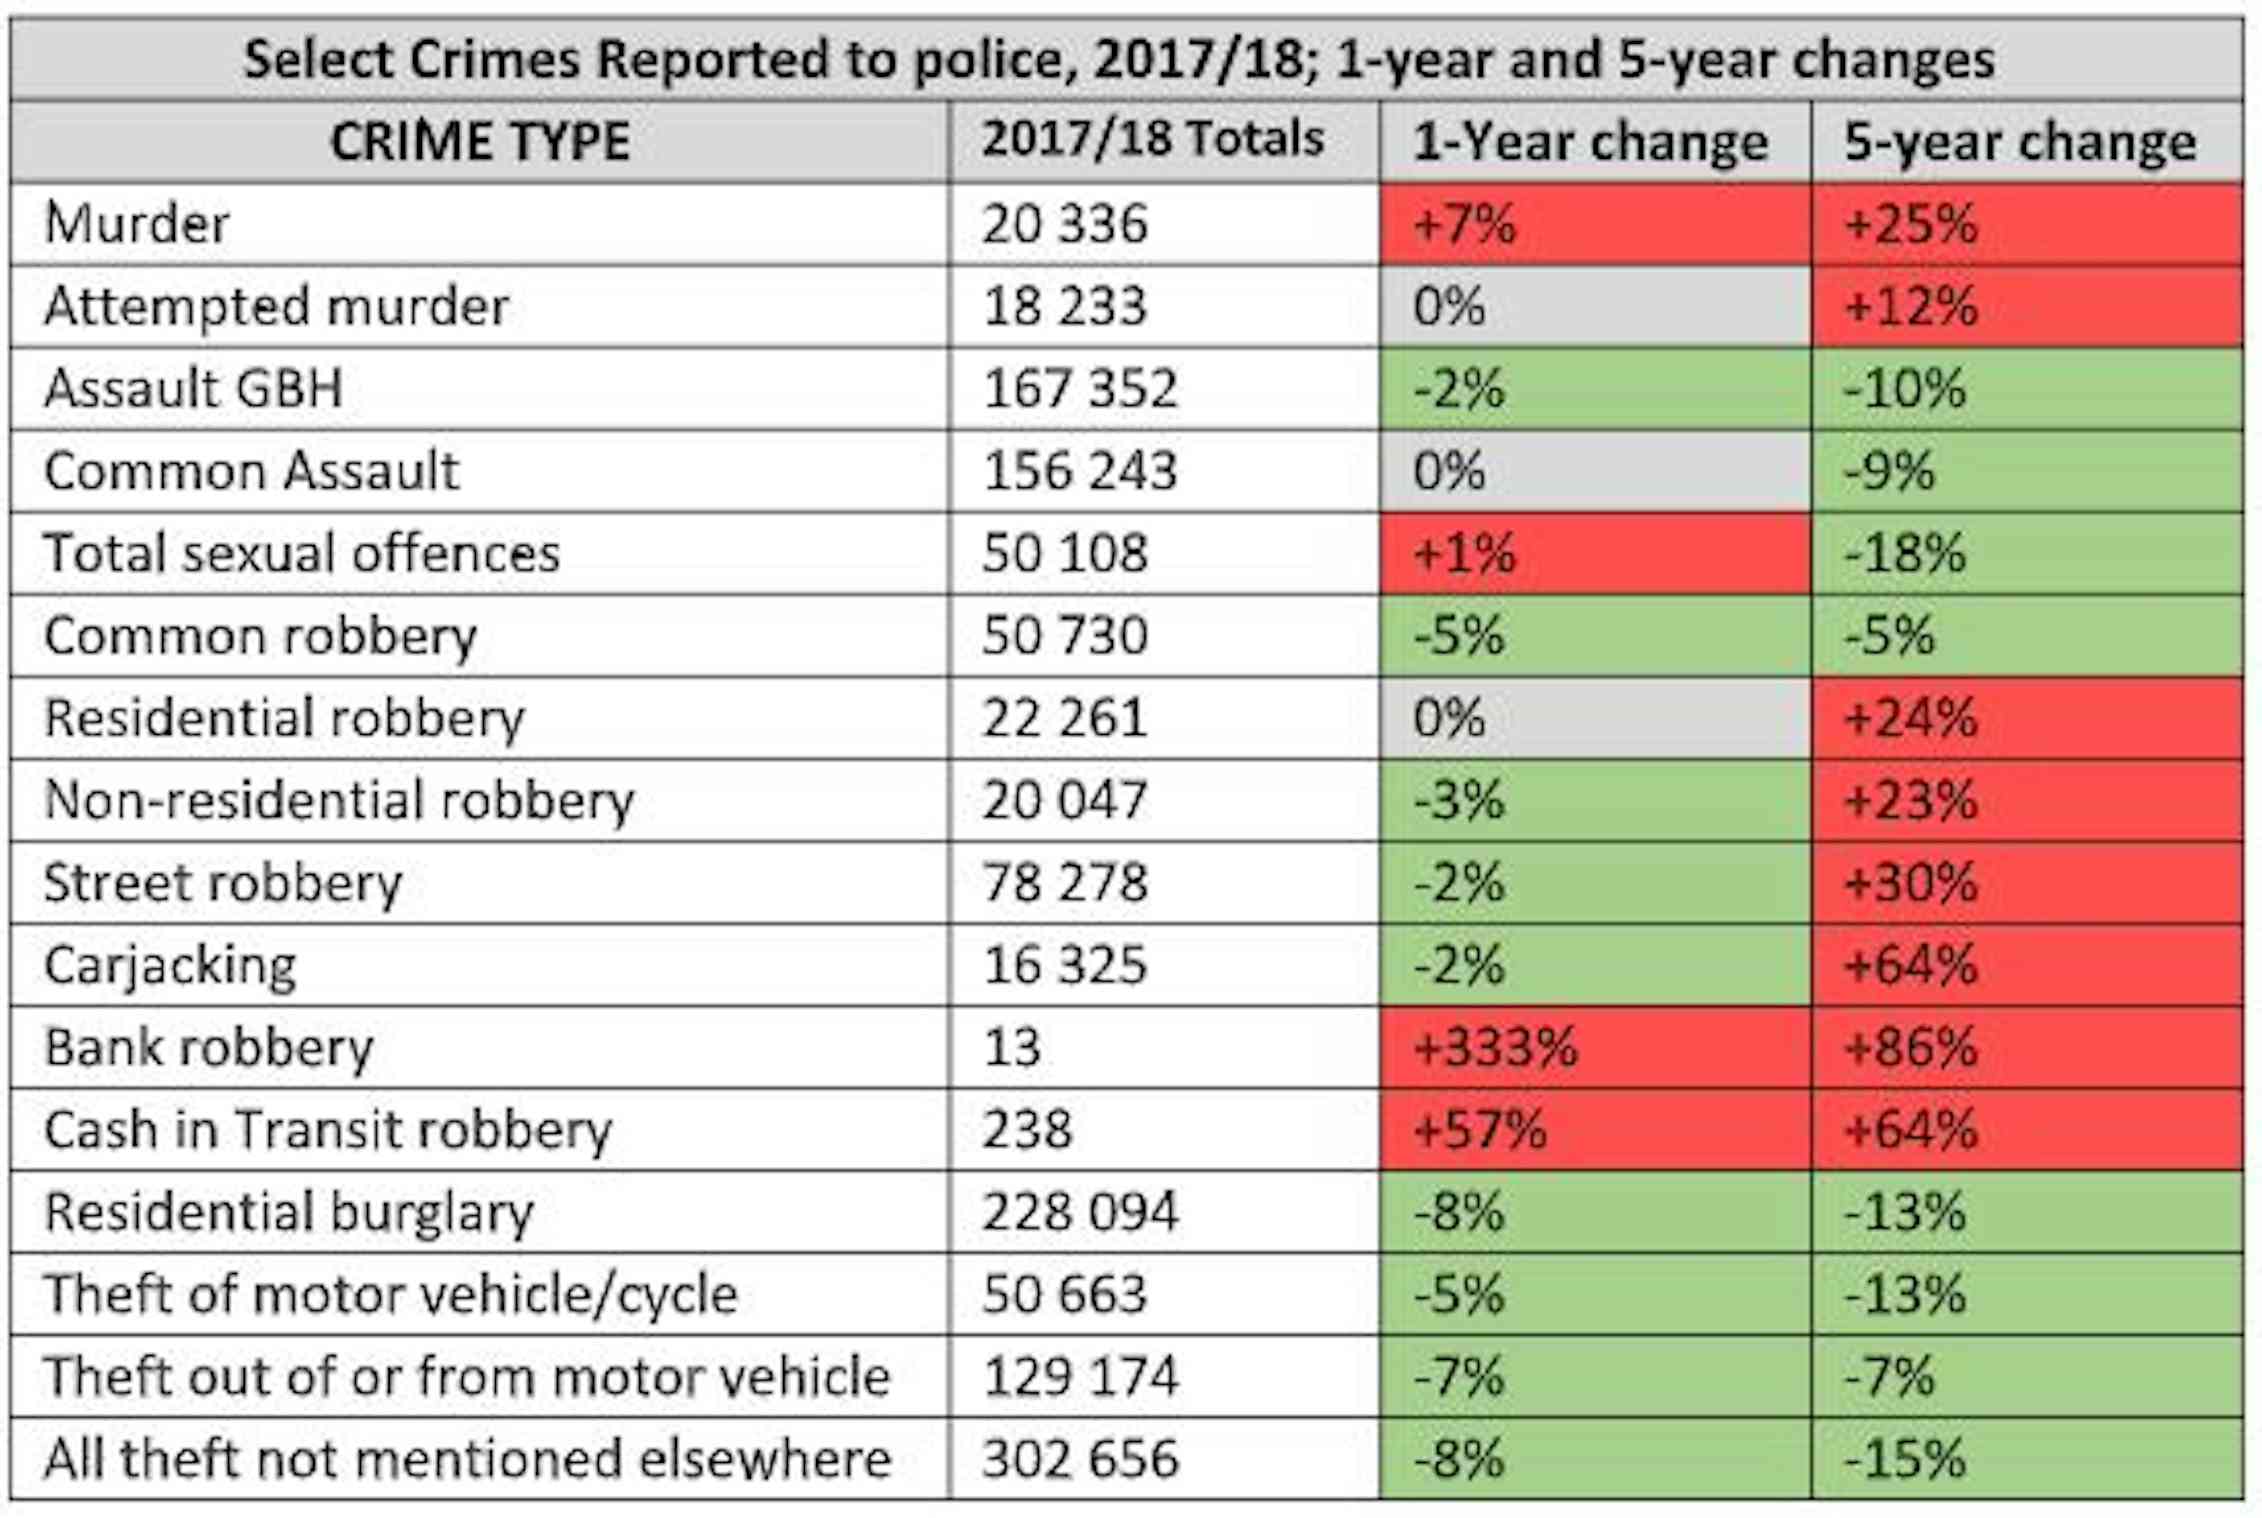 Victim surveys show that crime in South Africa may be dropping, yet